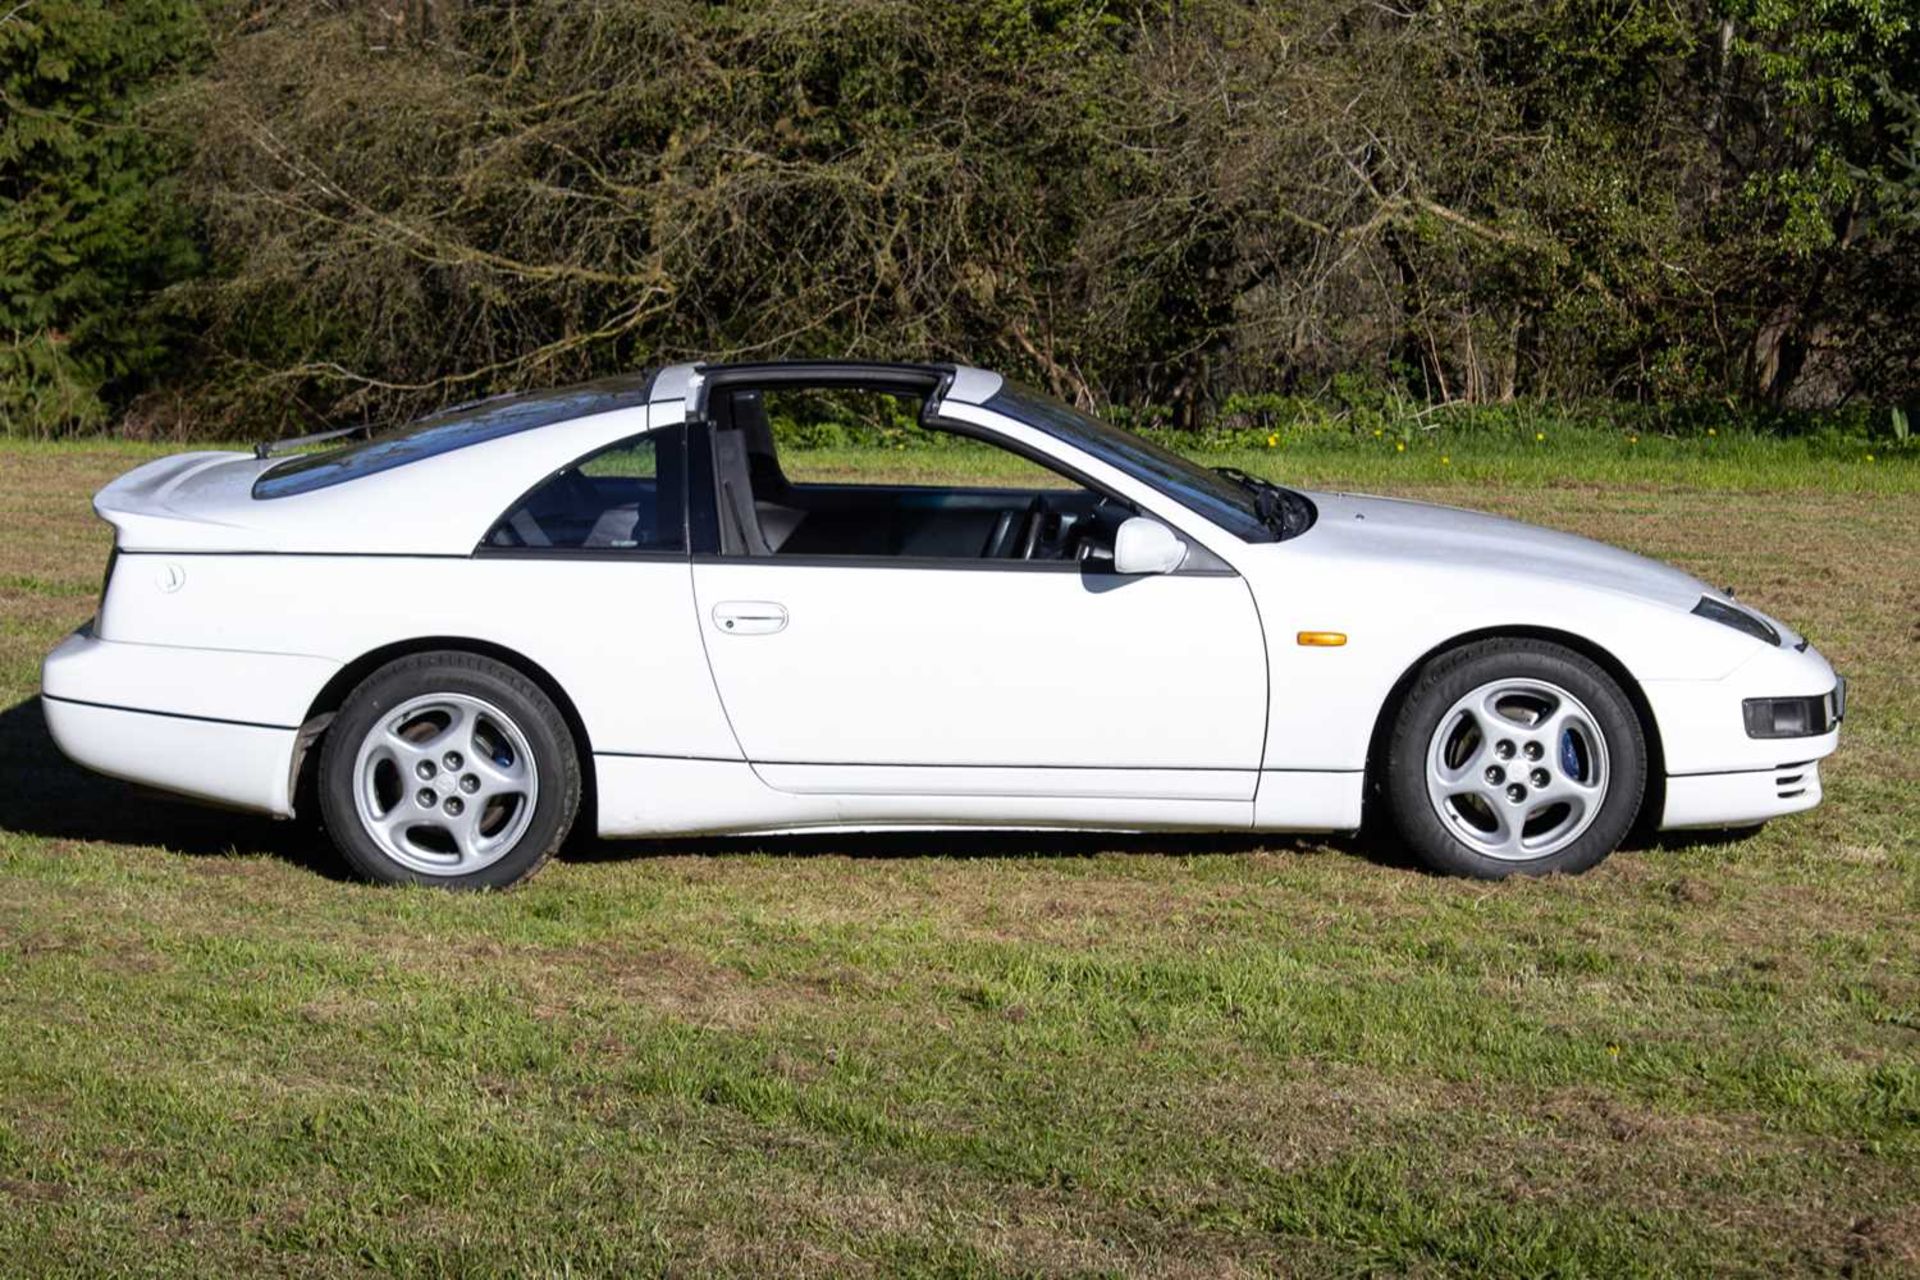 1990 Nissan 300ZX Turbo 2+2 Targa One of the last examples registered in the UK - Image 18 of 89